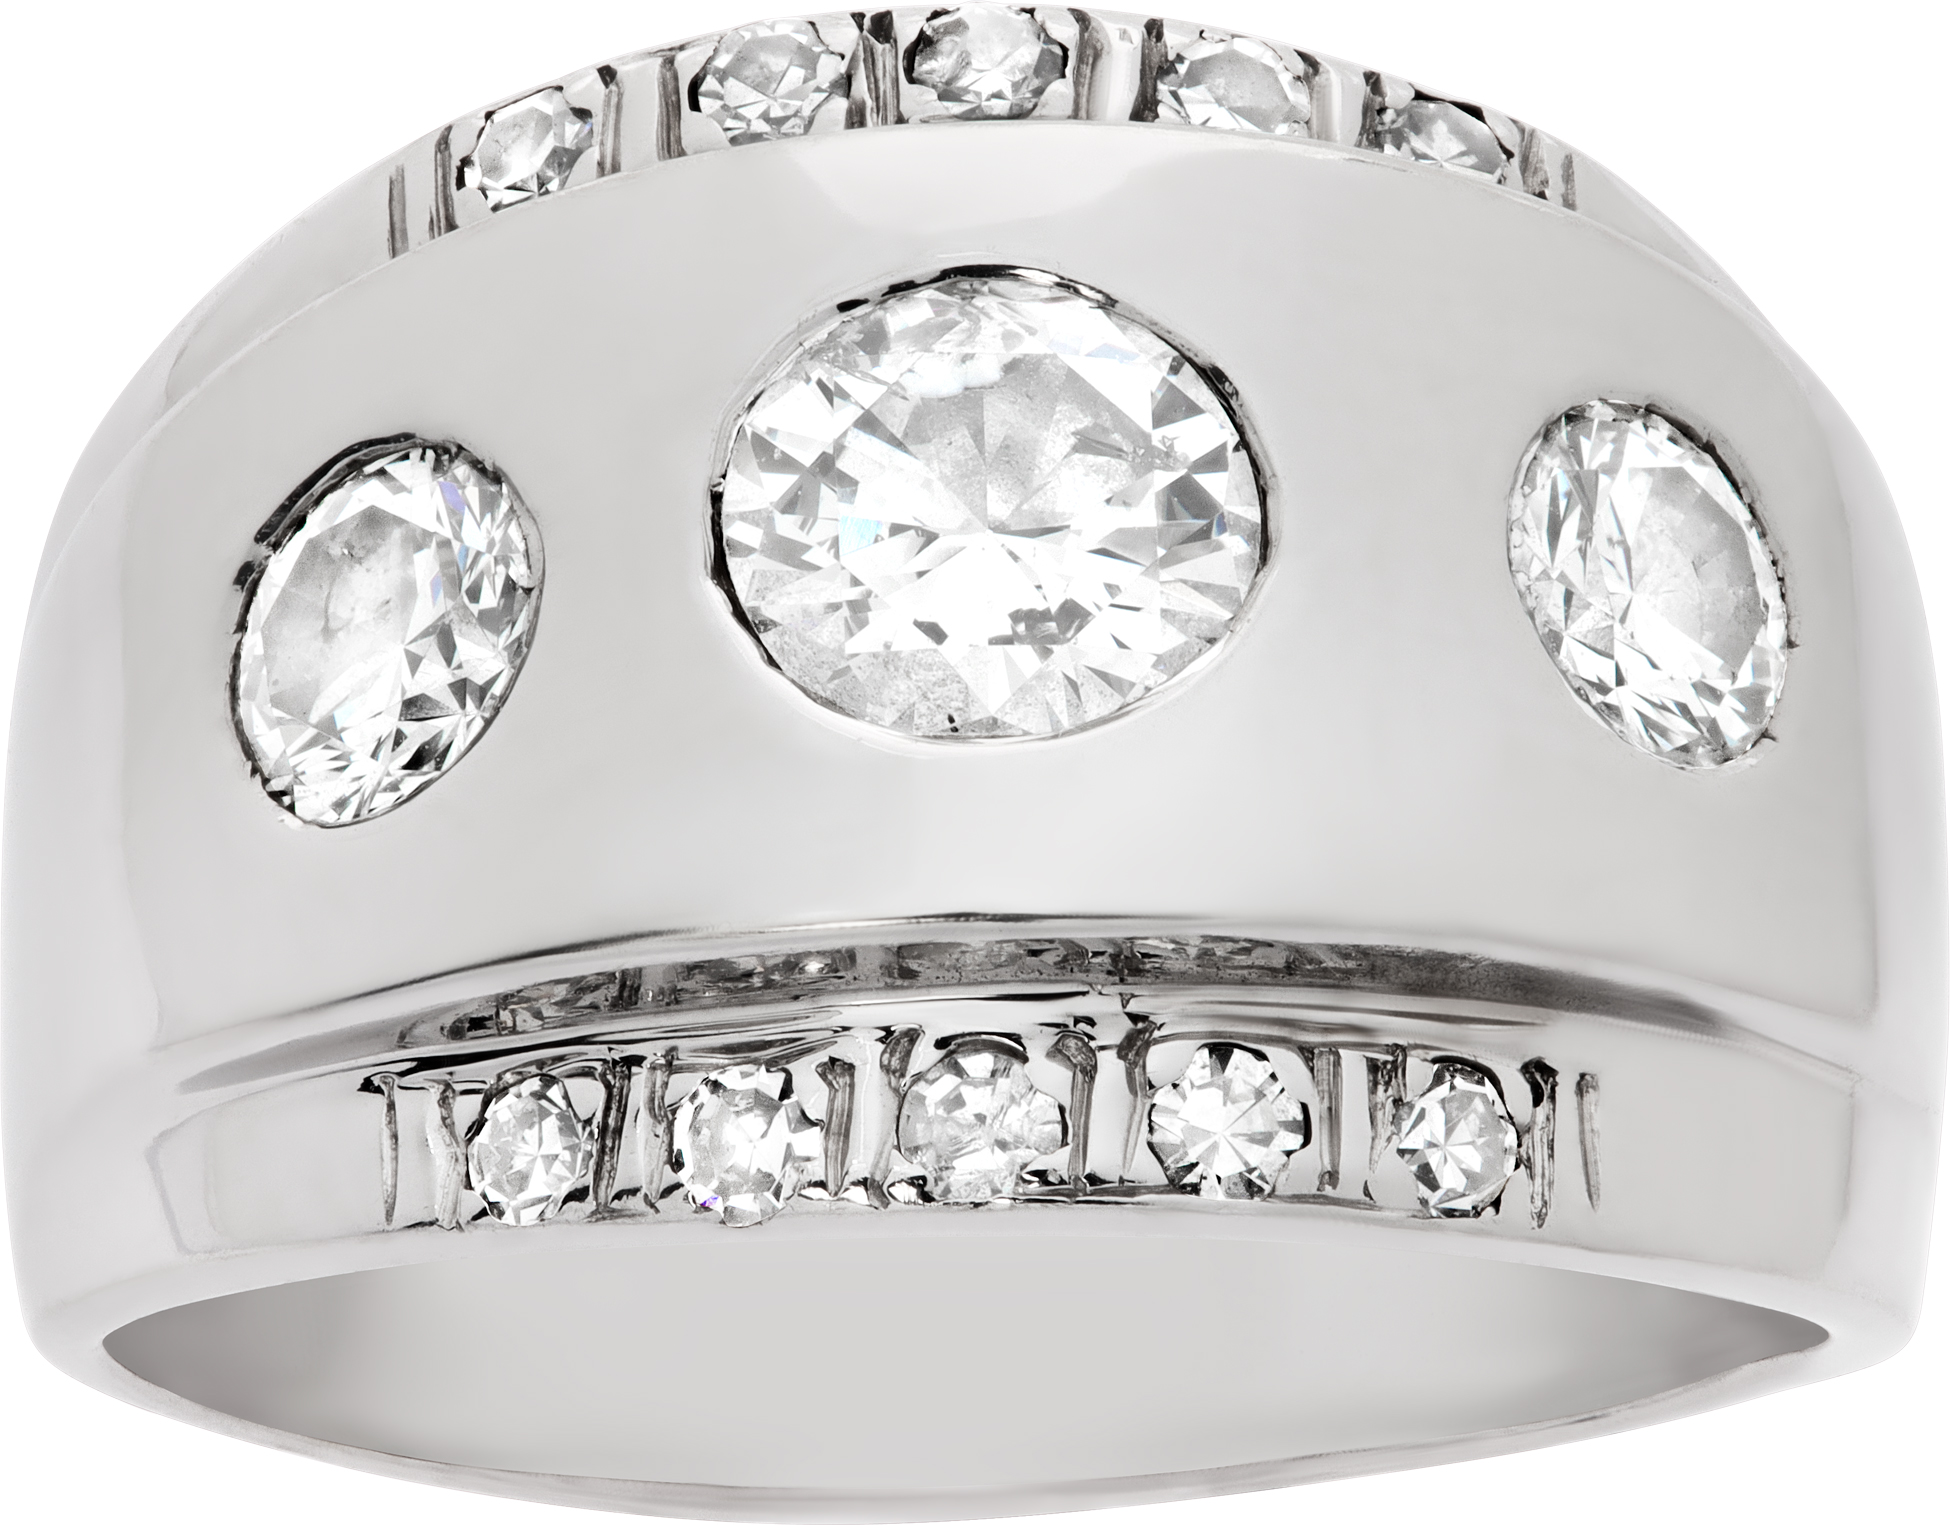 Wide diamond band in 14k white gold with approximately 0.75 carat center diamond (Stones)